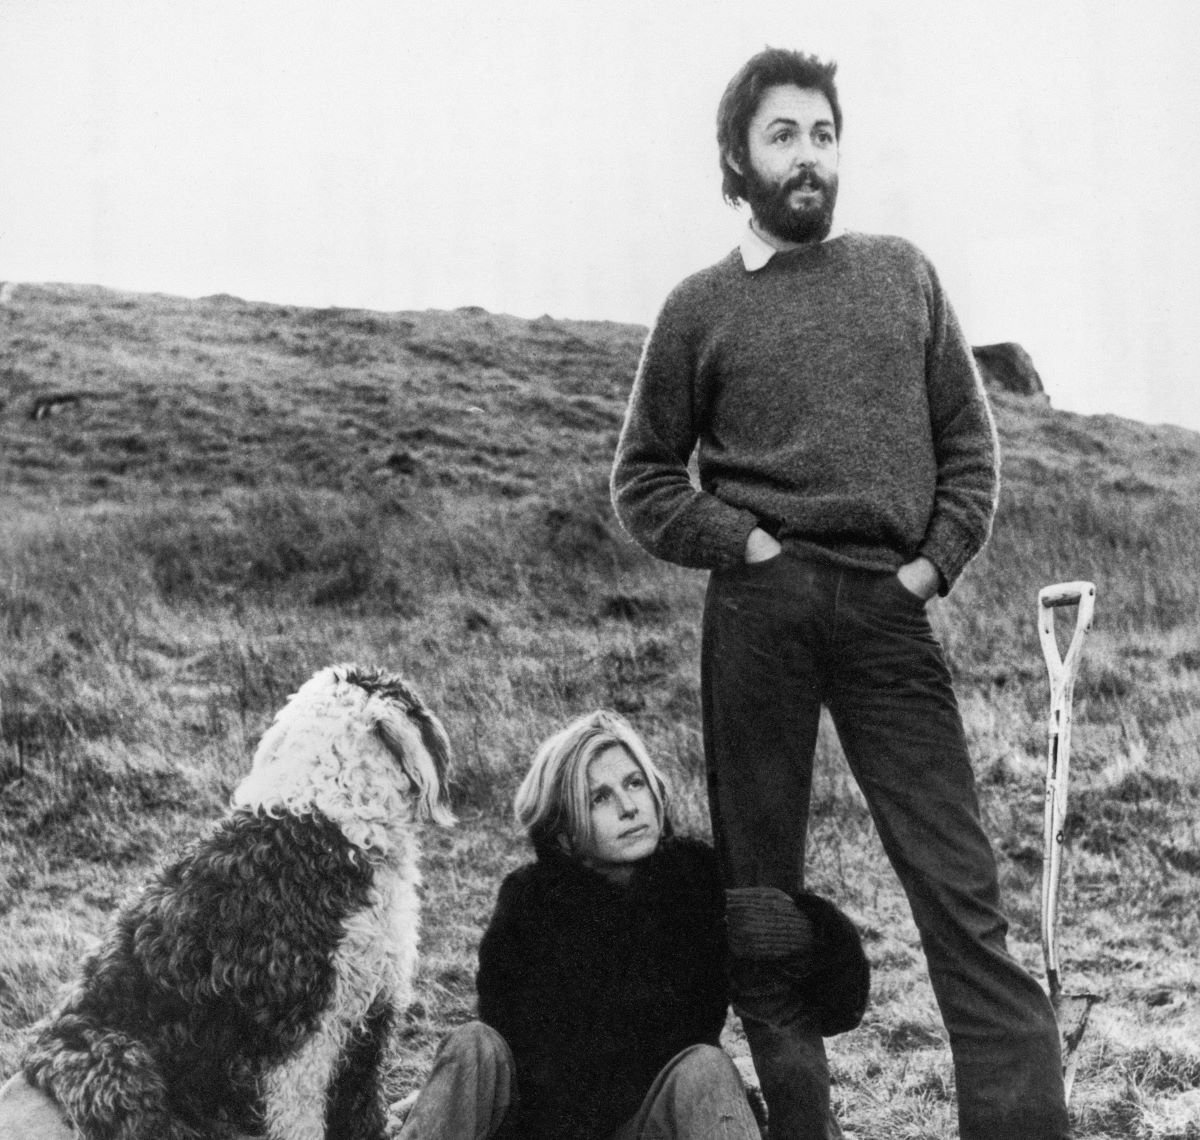 A black and white picture of Paul McCartney standing next to a shovel. Linda McCartney sits on the ground between Paul and a dog.